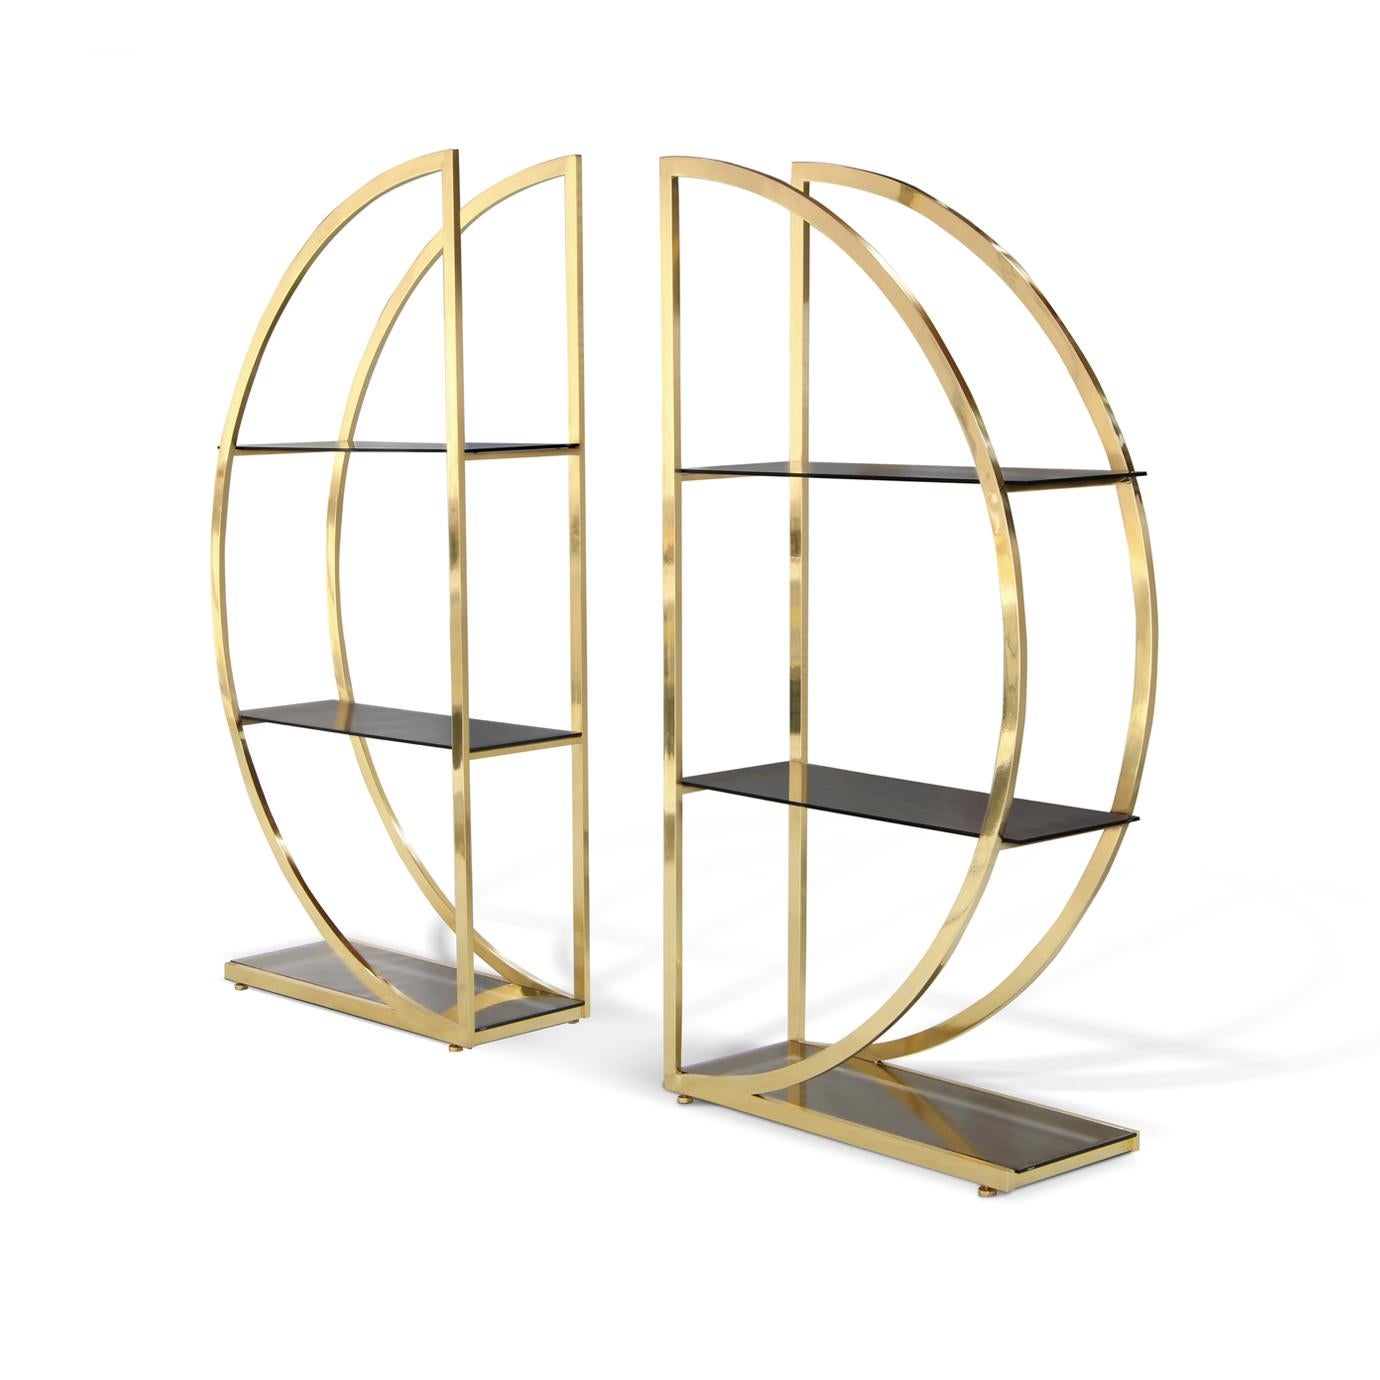 Indulge in the opulent essence of Art Deco design with the Decadence Bookcase. Two ornate metal semi-circles are joined in a glamourous union by sleek glass shelves and her backless design allows for the perfect canvas to store your simple pleasures.